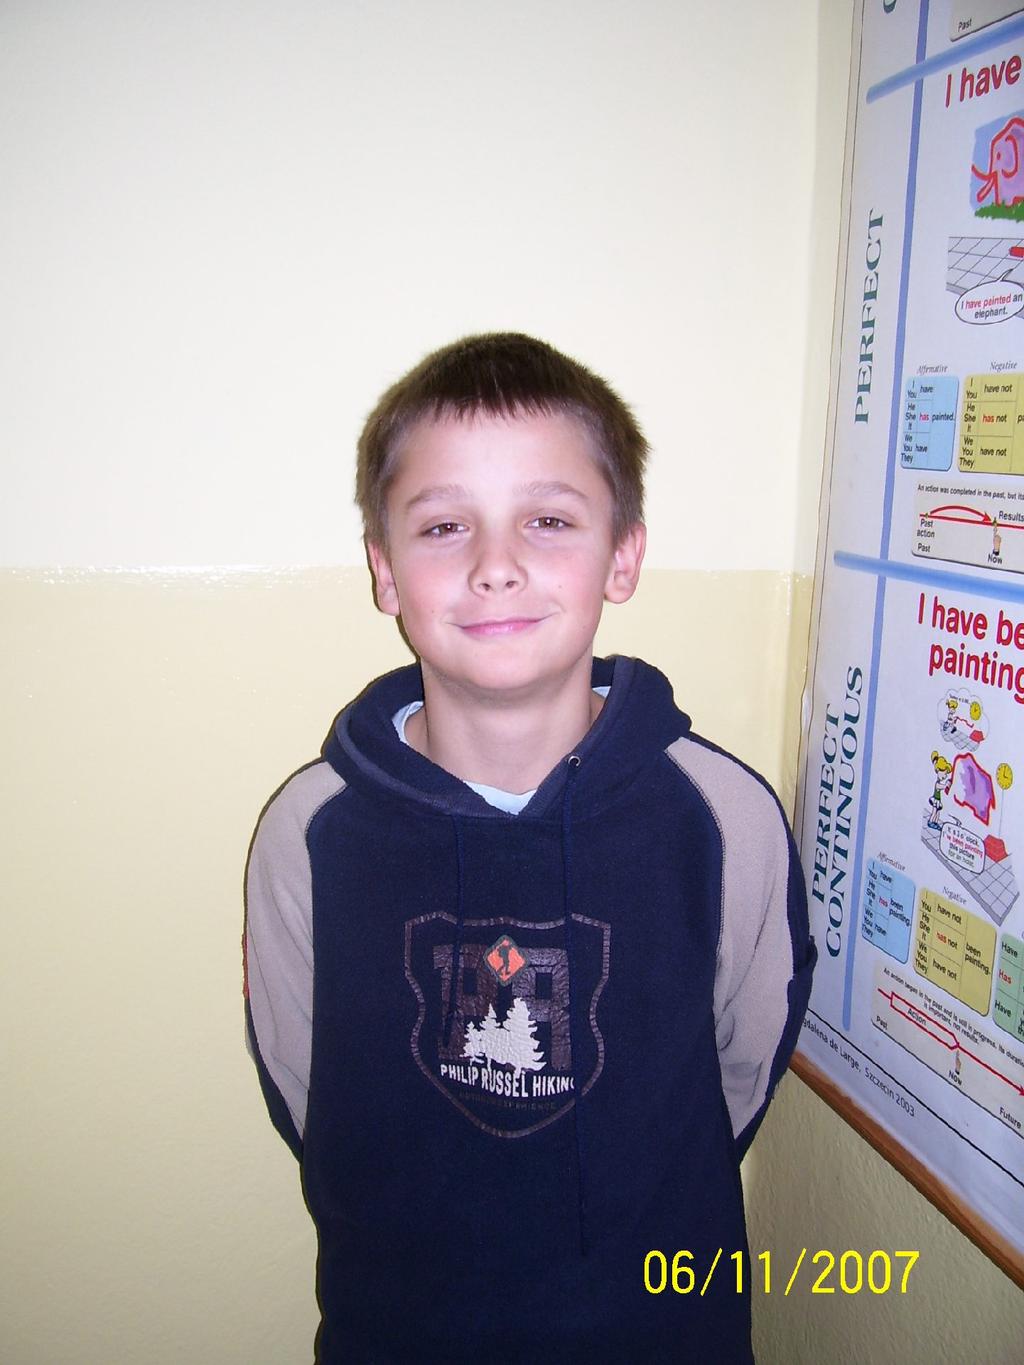 Hi! My name is Bartosz. My surname is Kokot. I am in class 6.I am 12 years old. I was born in 1995. I love sport.